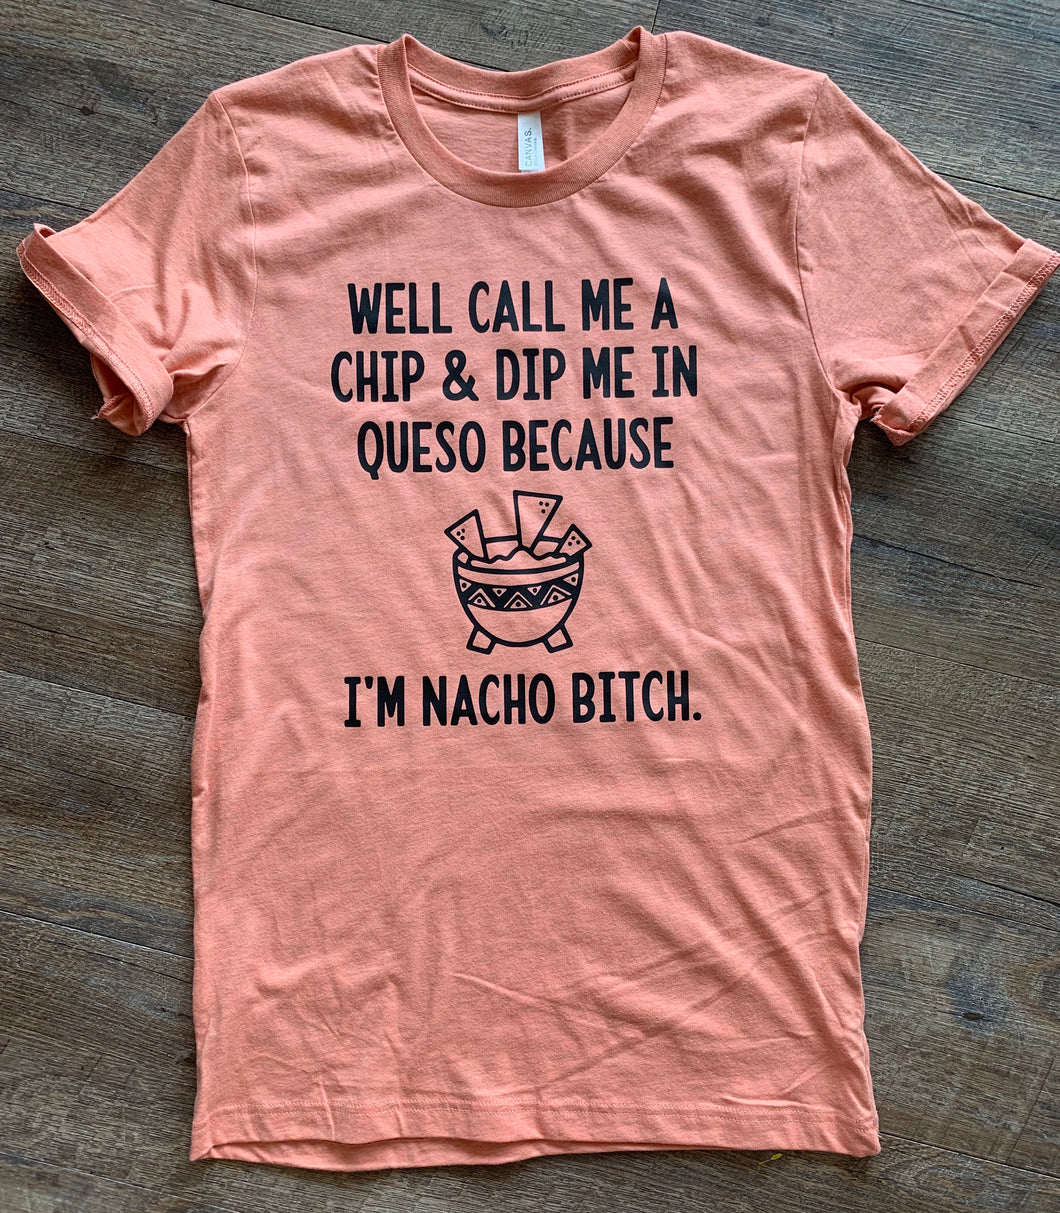 Well call me a chip and dip me in queso because I’m nacho bitch funny graphic tee - Mavictoria Designs Hot Press Express